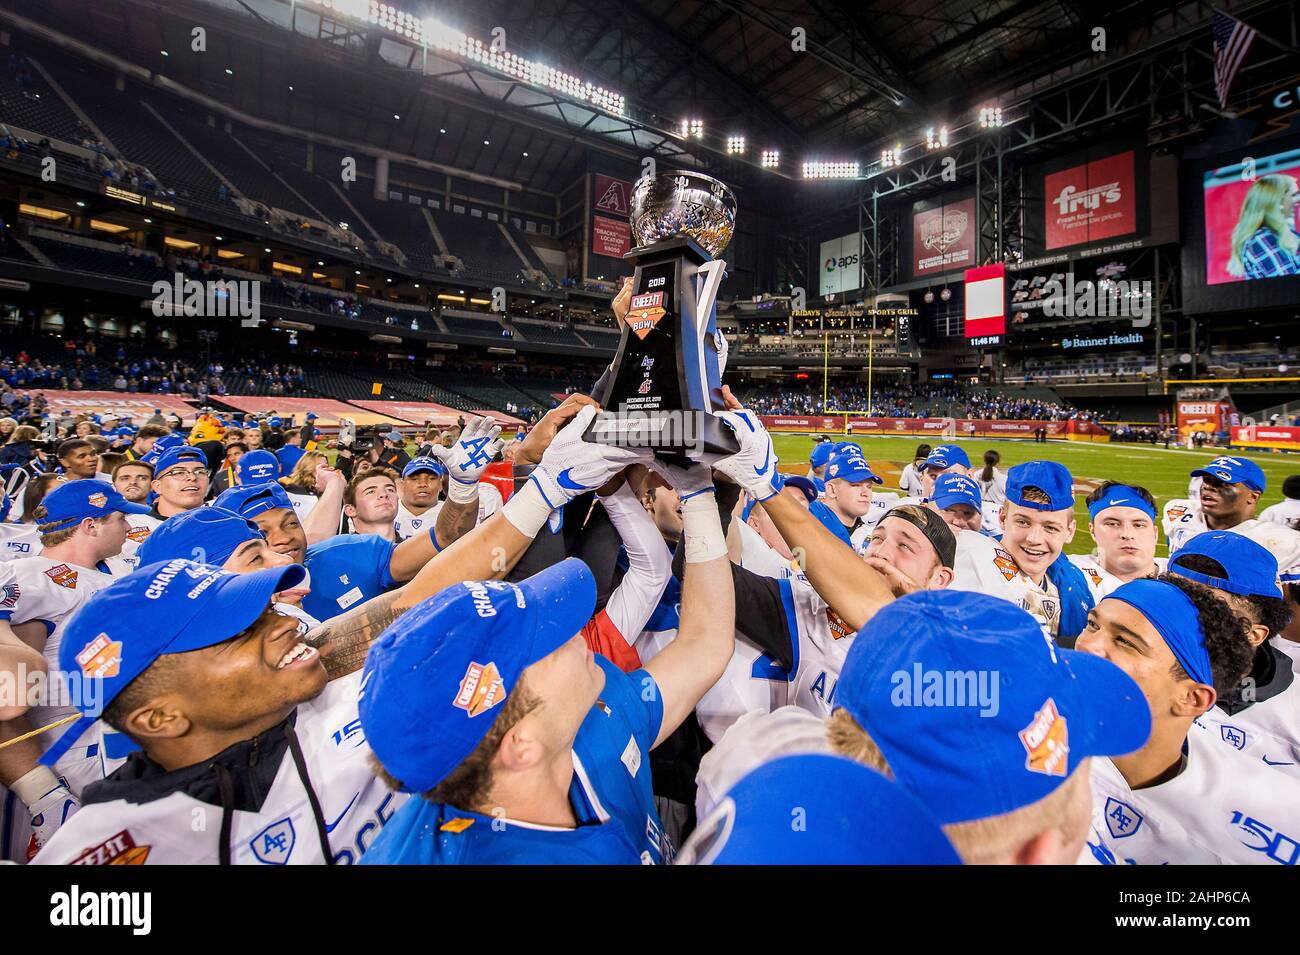 The U.S. Air Force Academy football players hold up the Cheez-It Bowl championship trophy following victory over Washington State University in the Cheez-It Bowl championship game at Chase Field December 27, 2019 in Phoenix, Arizona. Air Force defeated Washington State 31-21 to finish their season with an 11-2 record and an eight game win streak making it the third best season in program history. Stock Photo